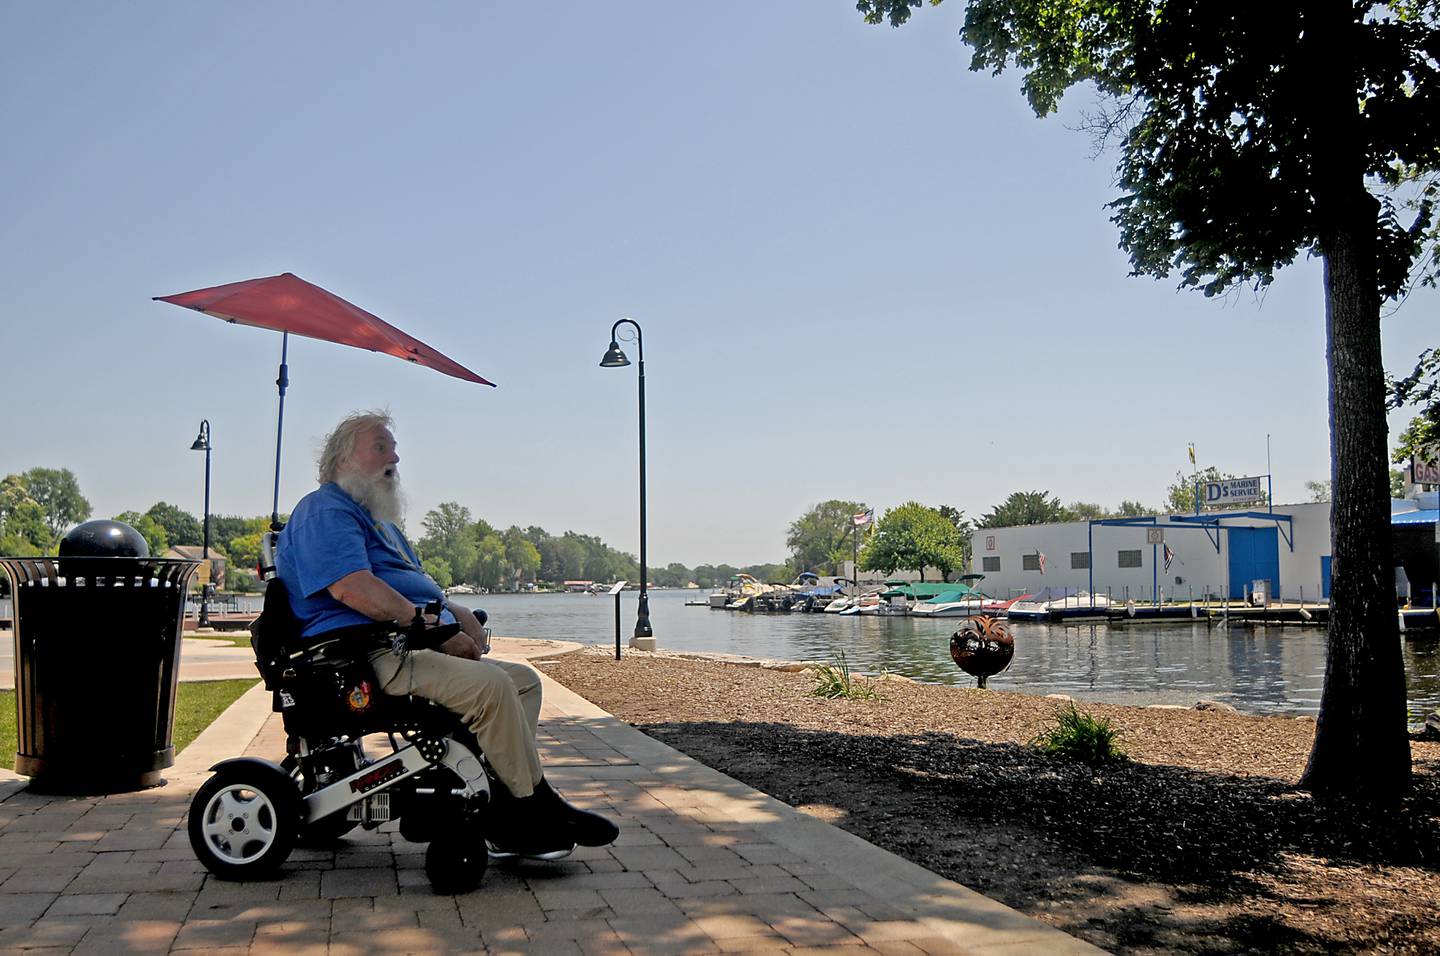 Jim Macintyre takes advantage of a cool breeze and the shade from a large tree to keep cool Tuesday, June 14, 2022, at Millers Point in McHenry, as temperatures in the McHenry County area reached the mid-90’s.